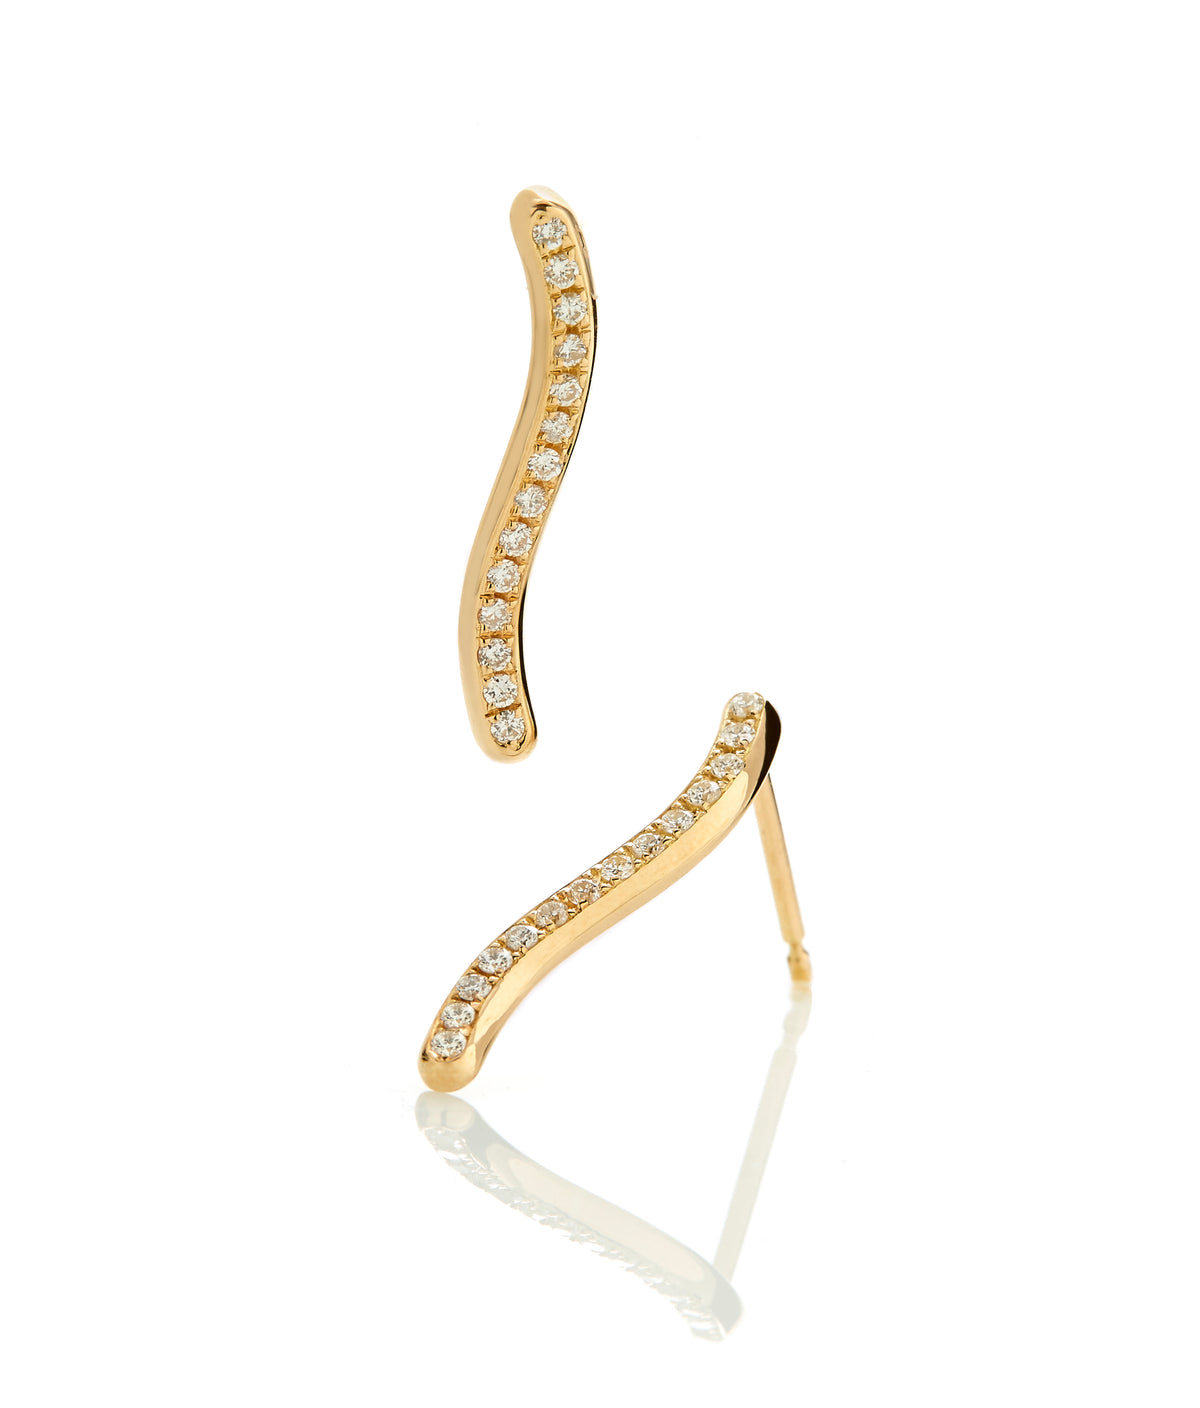 Waves Gold Earring with diamonds